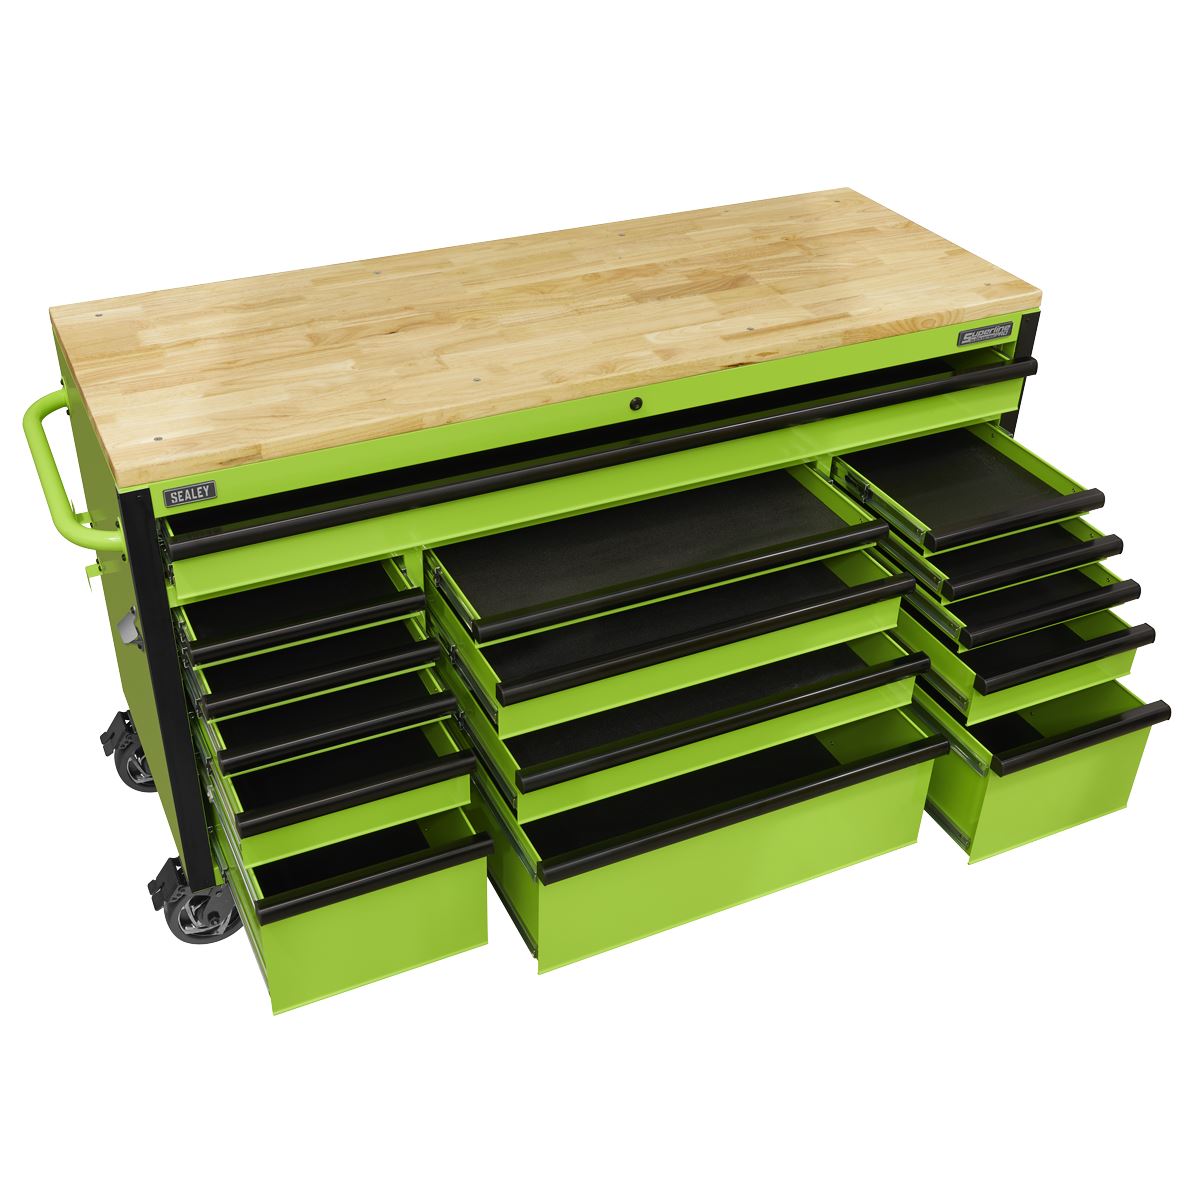 Sealey 15 Drawer Mobile Trolley with Wooden Worktop 1549mm AP6115BE